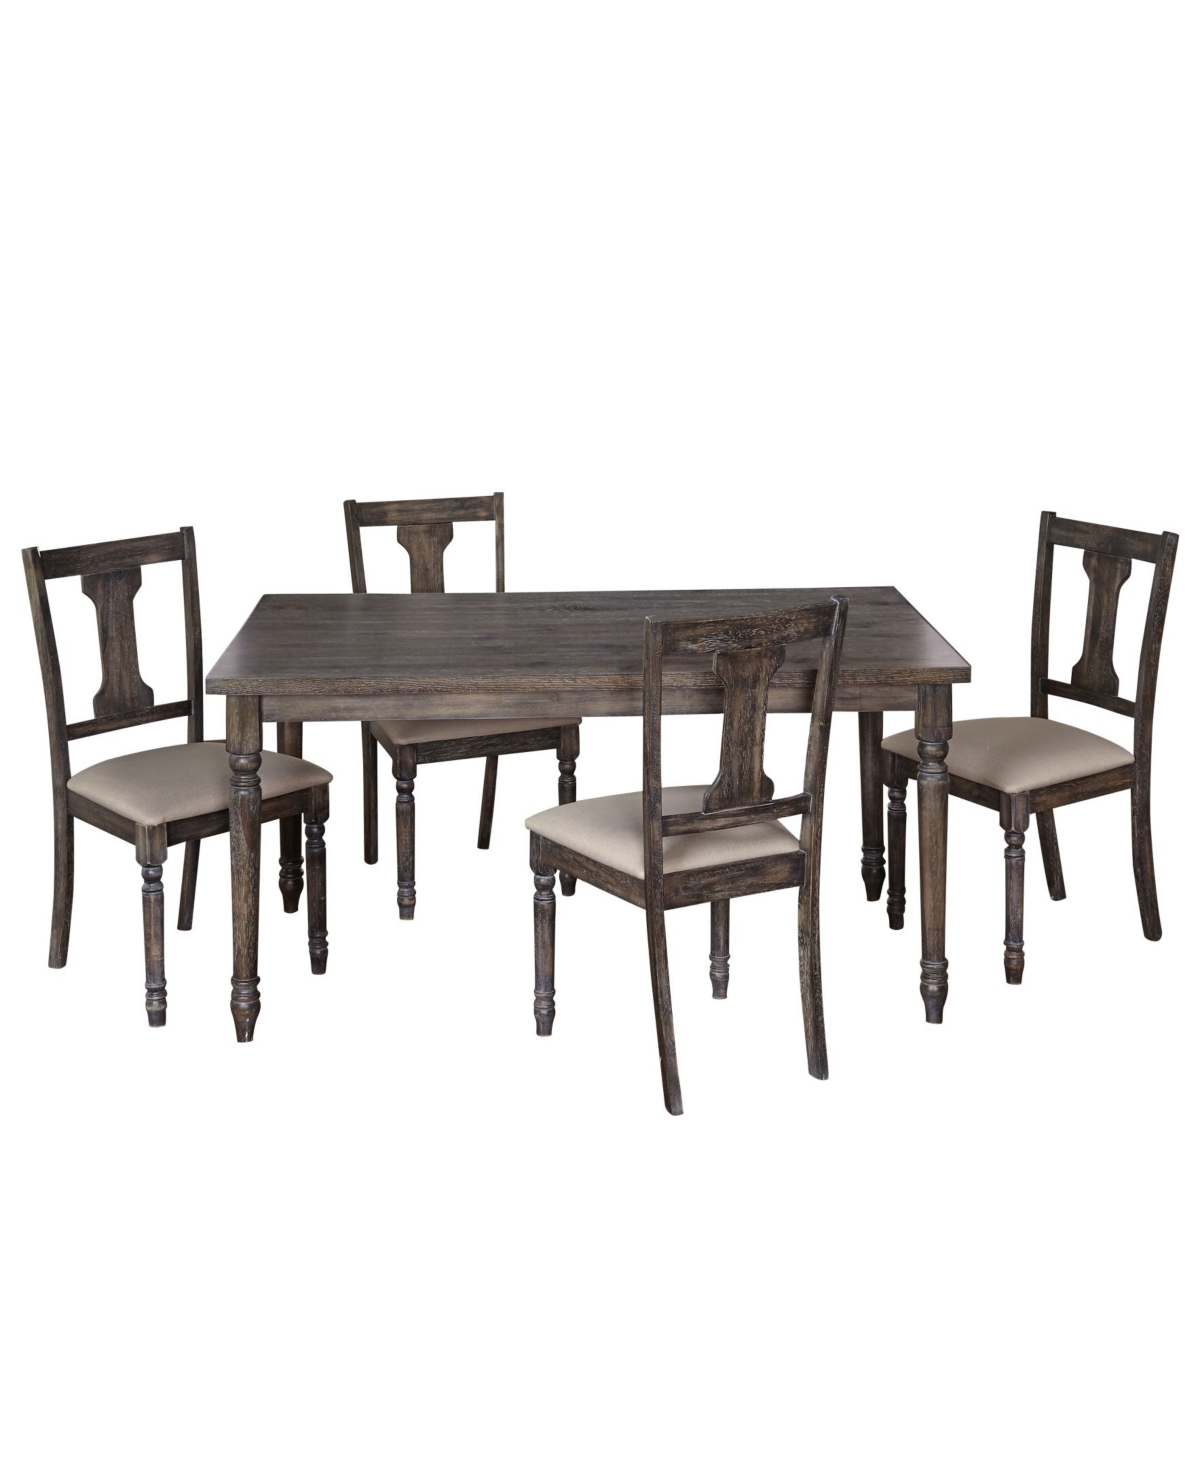 Buylateral 5 Piece Burntwood Dining Set